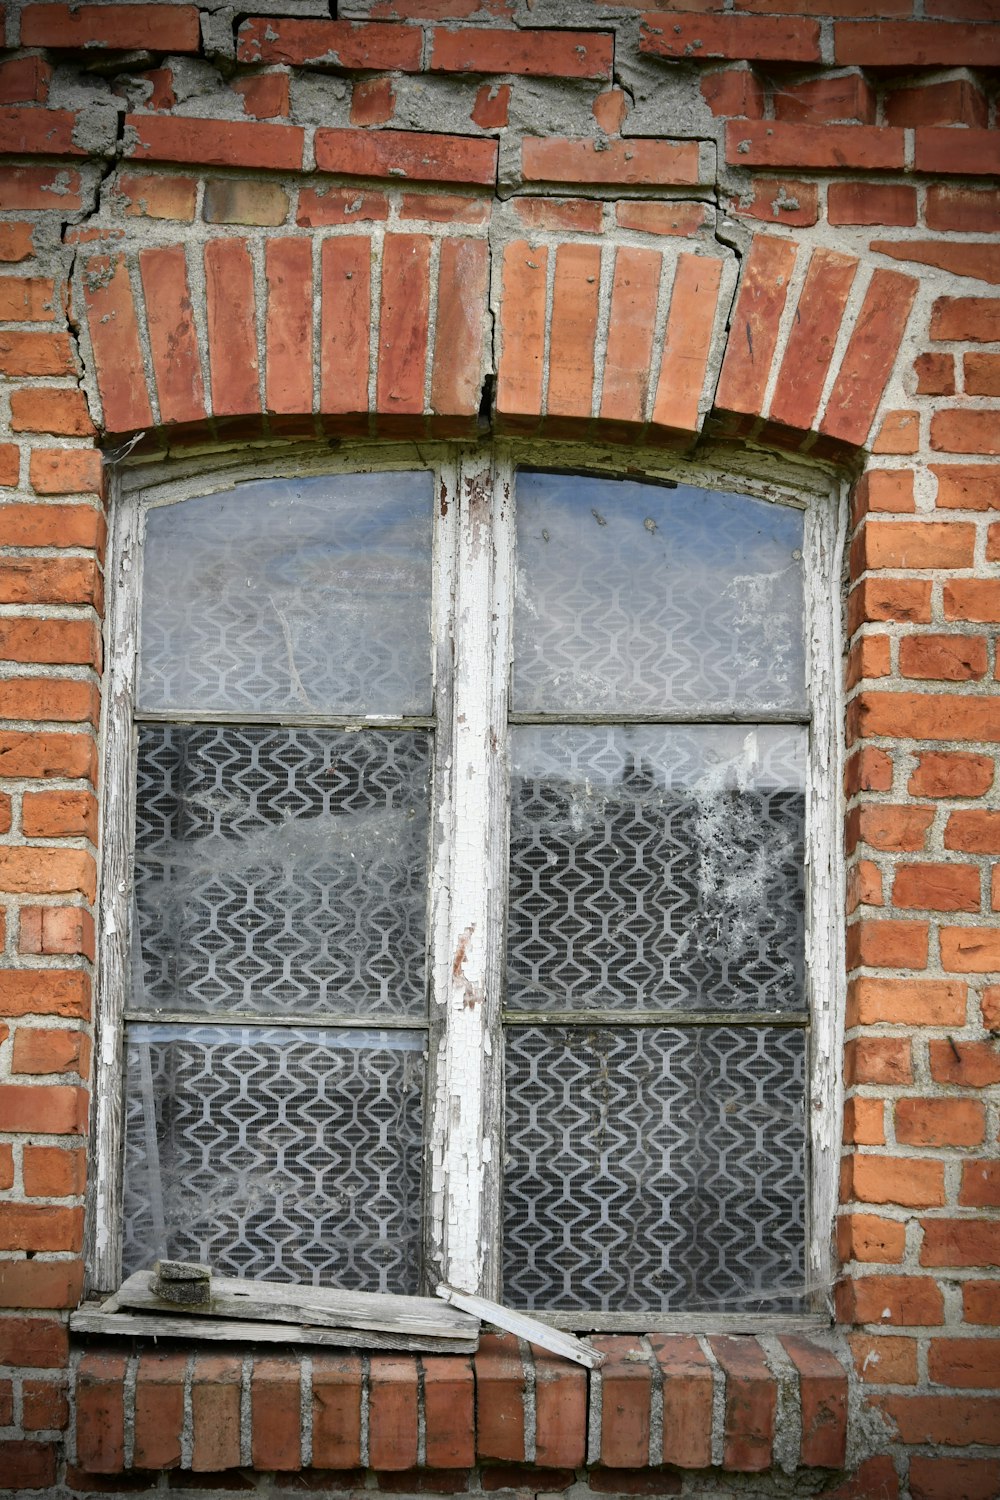 a brick building with a window and a window pane